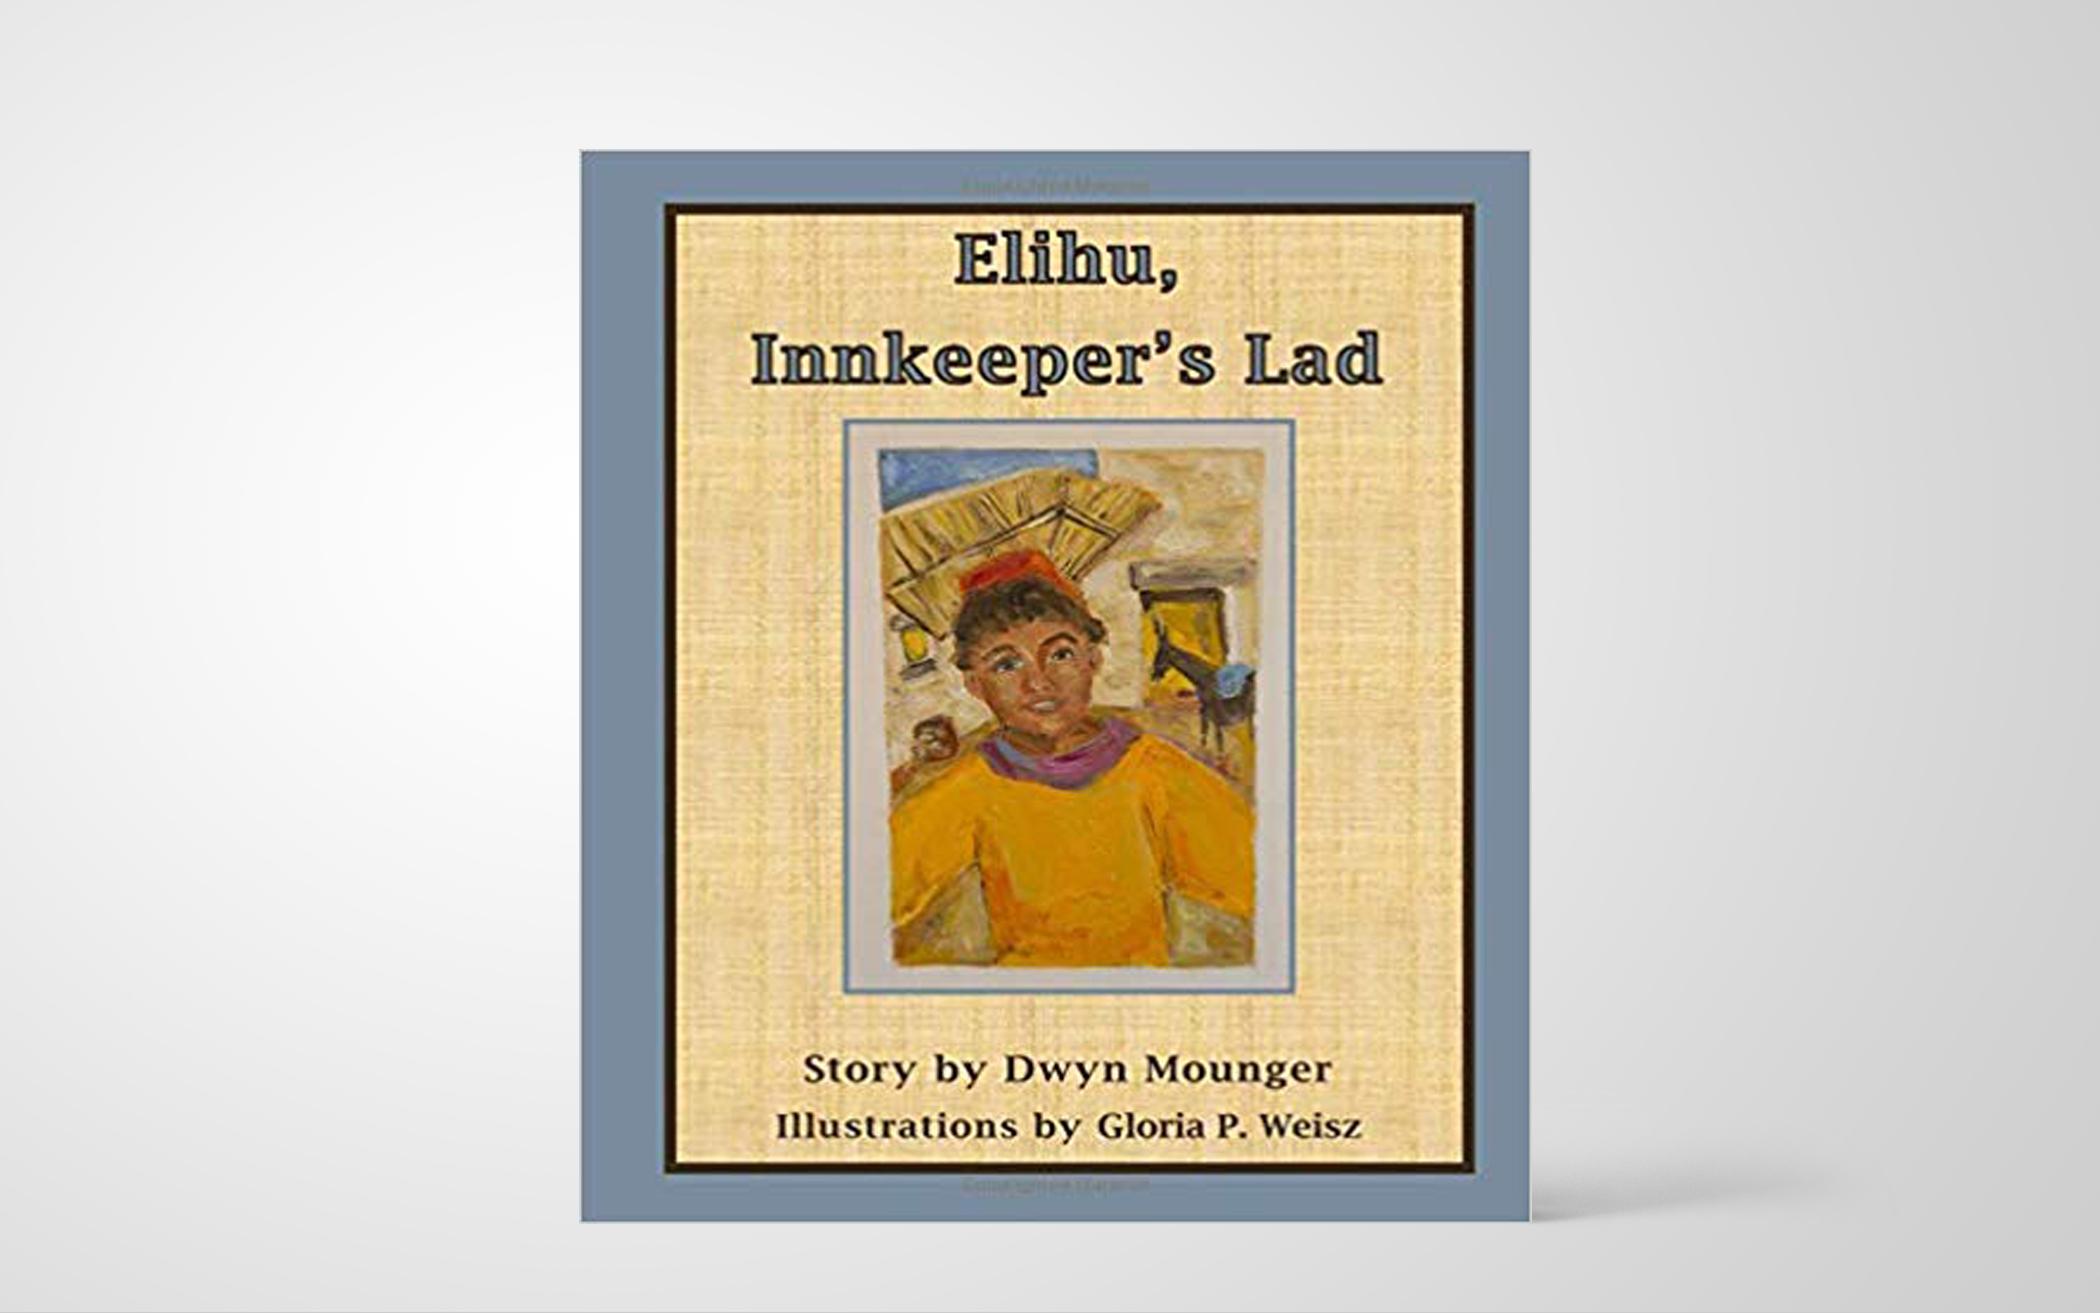 Reader-Submitted Review: Elihu, Innkeeper’s Lad